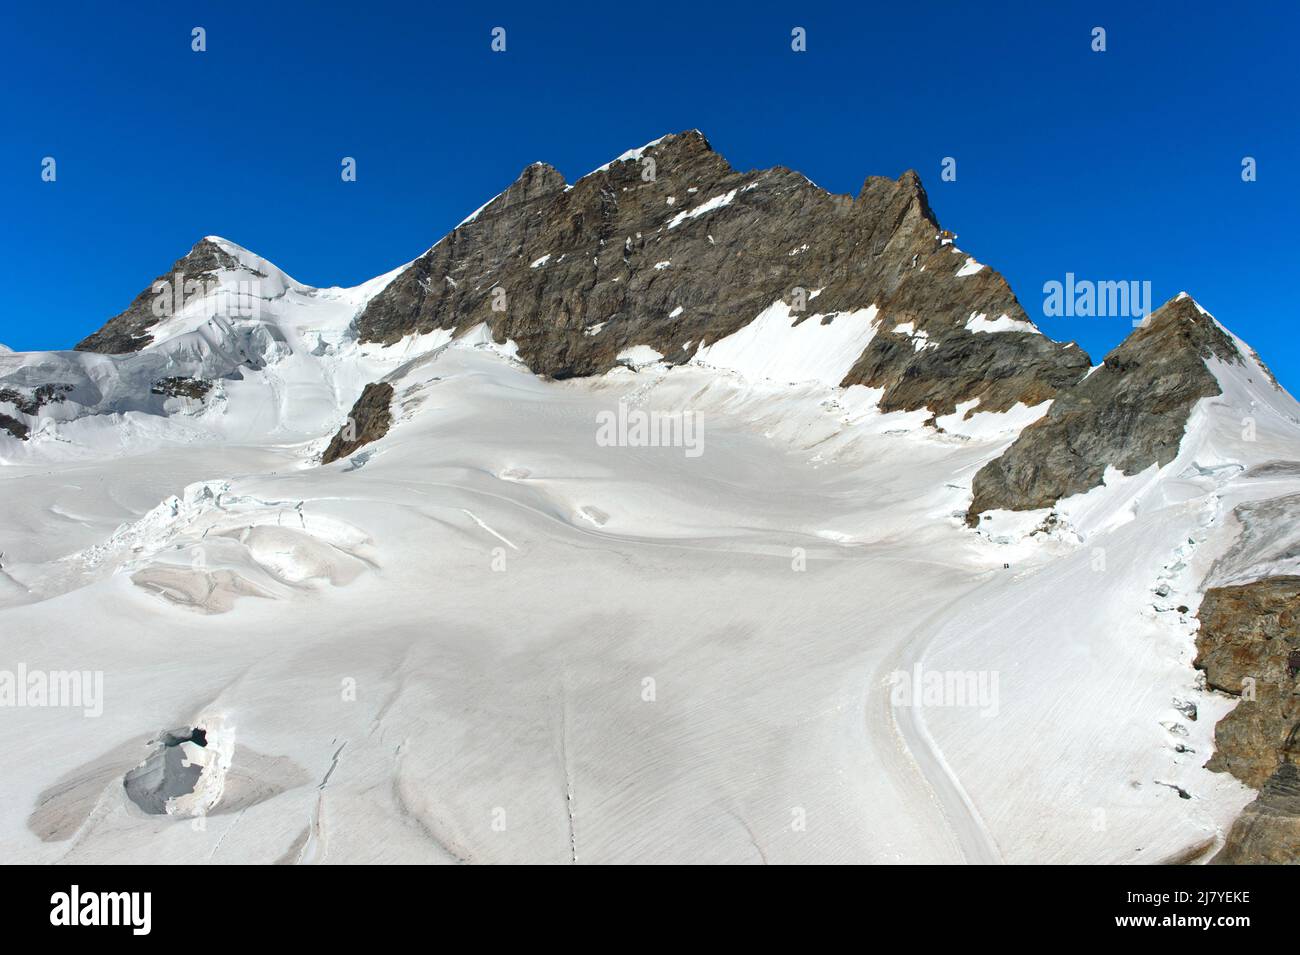 View across the Jungfraufirm glacier to the Jungfrau summit, Grindelwald, Bernese Oberland, Switzerland Stock Photo